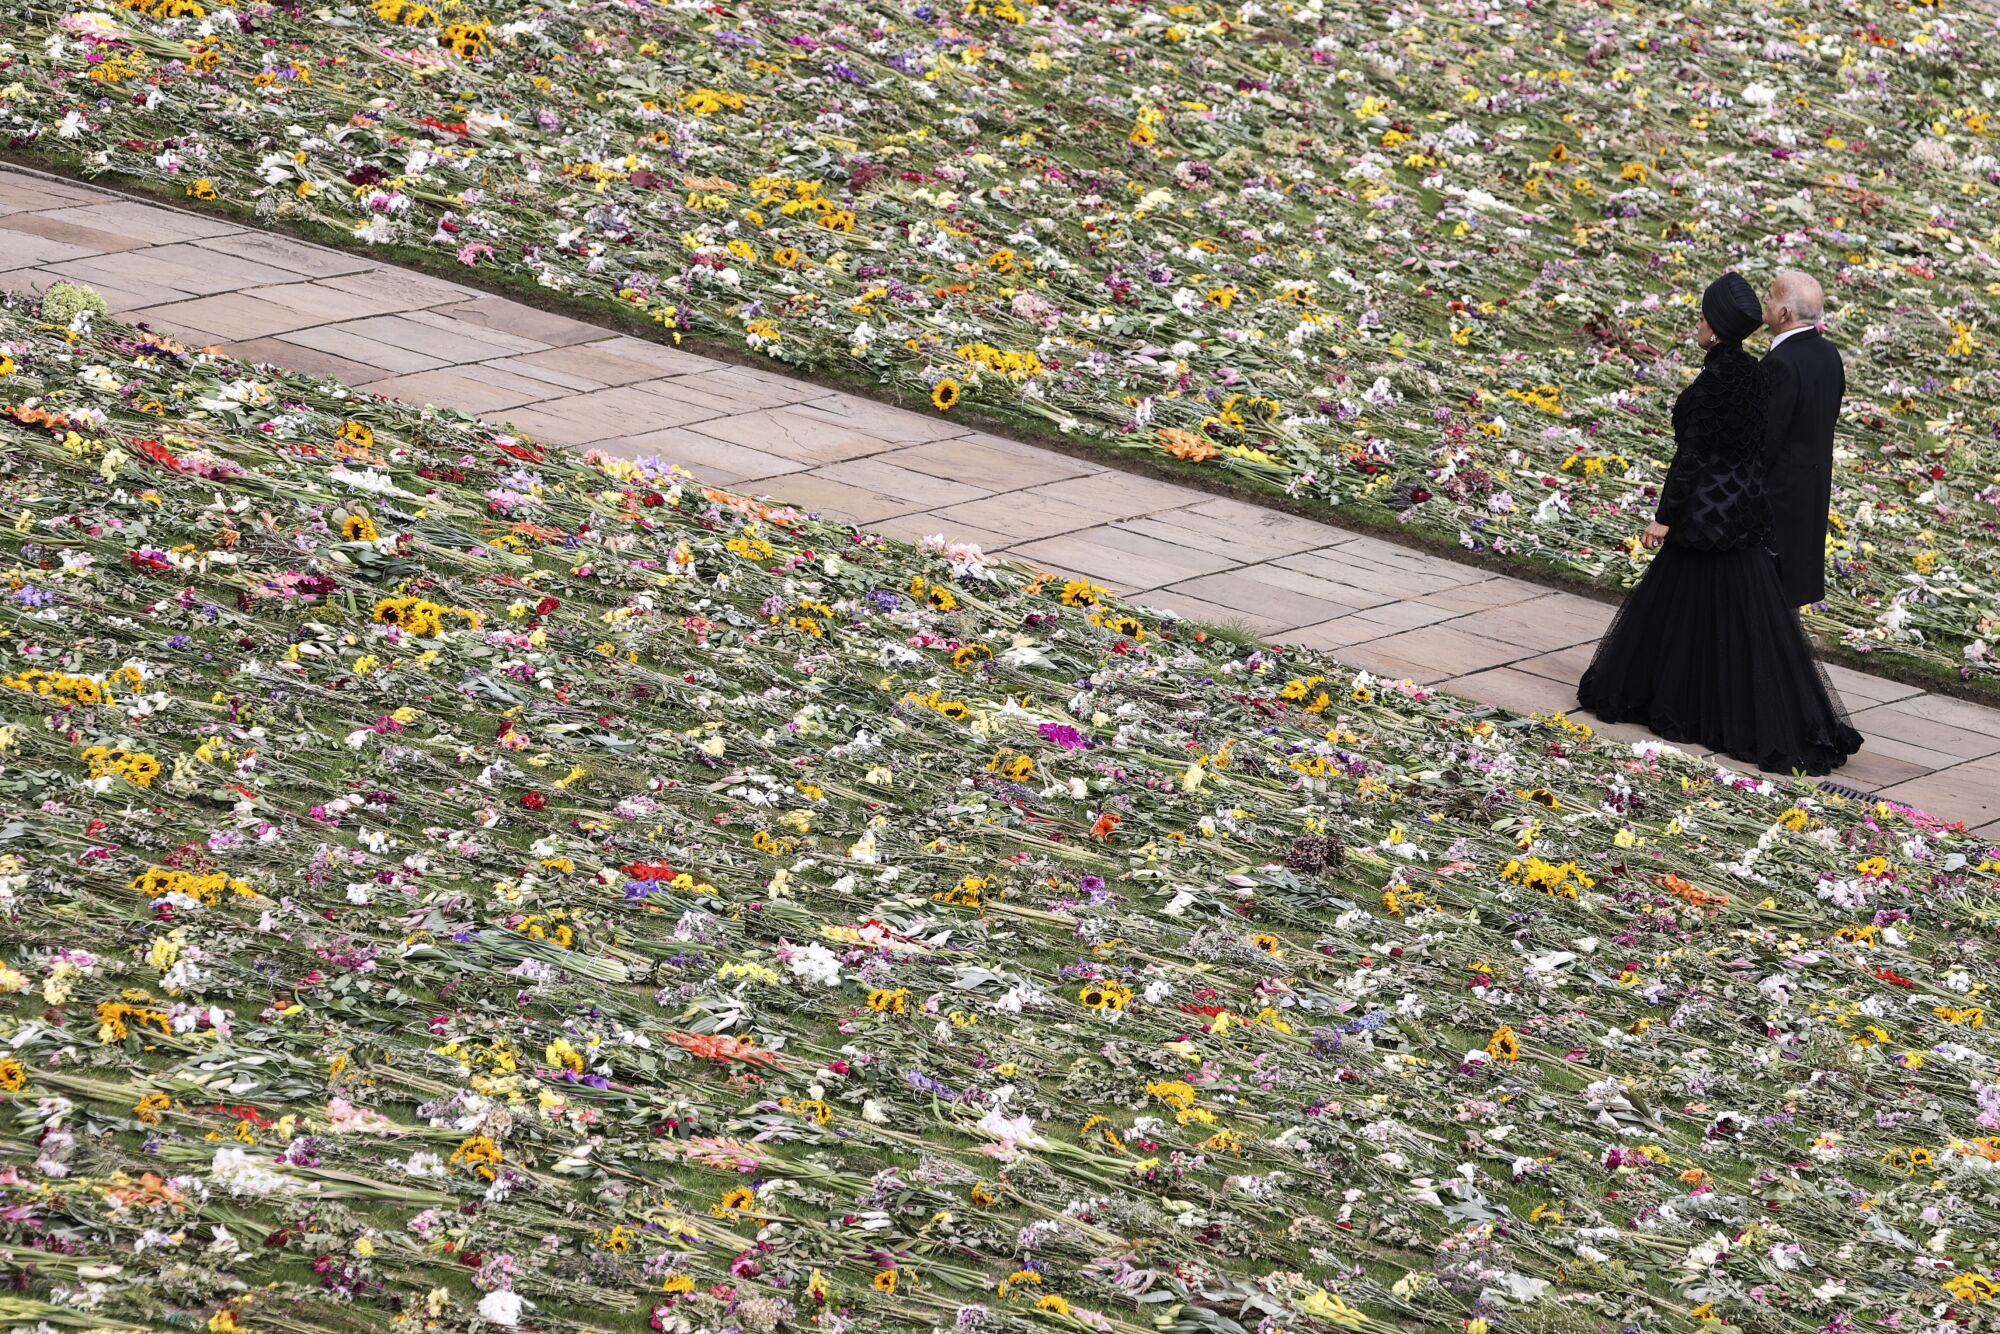 A man and a woman dressed in black walk on a sidewalk in front of a lawn covered with flowers.